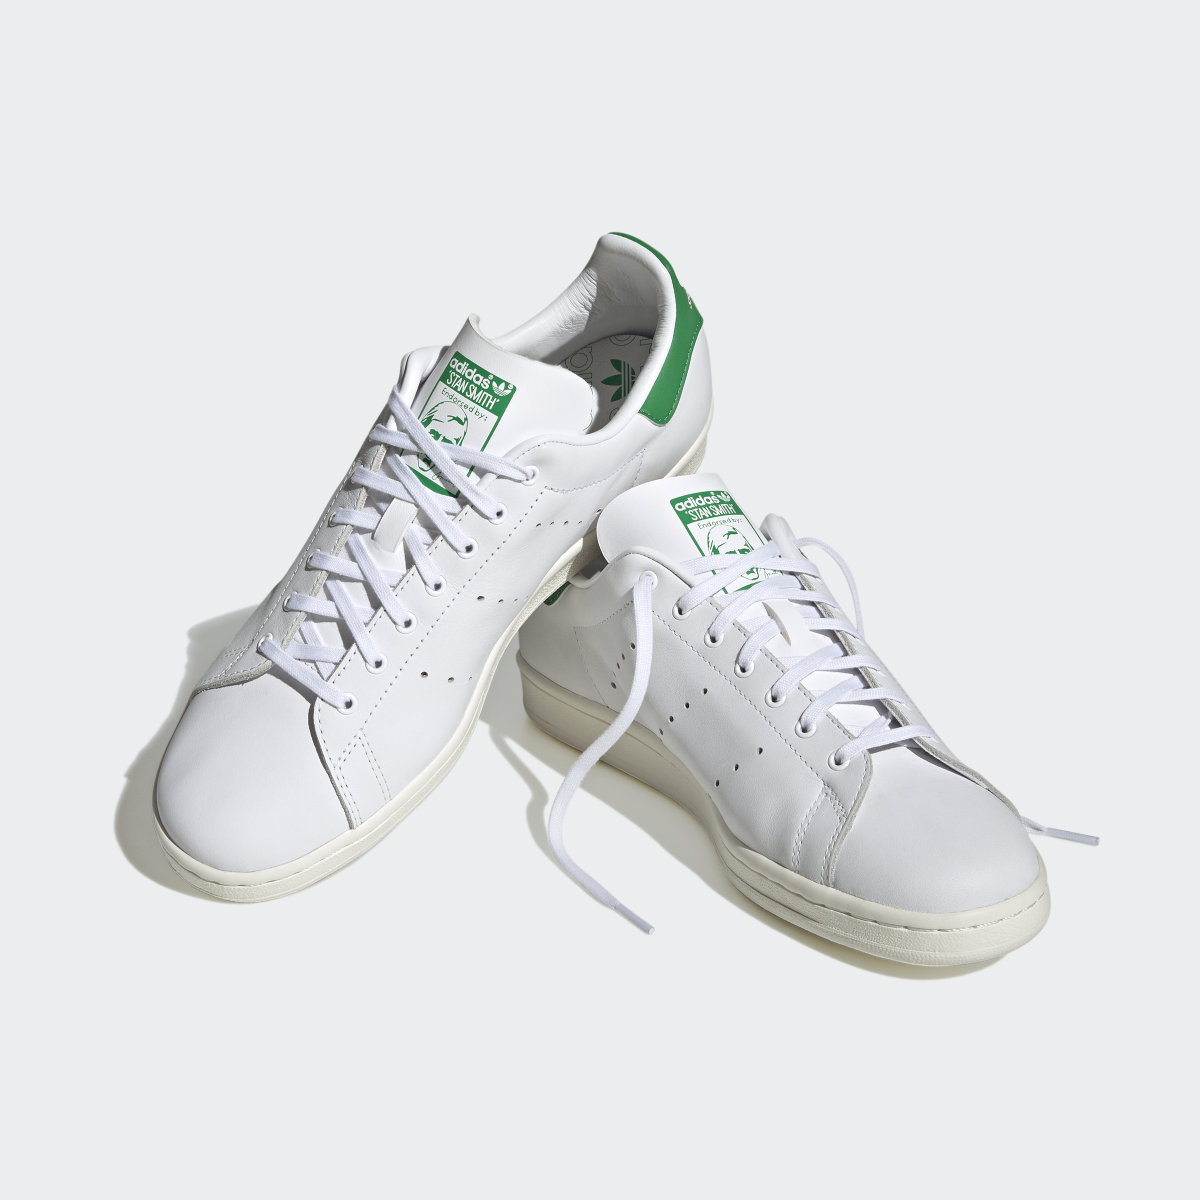 Adidas Stan Smith 80s Shoes. 5